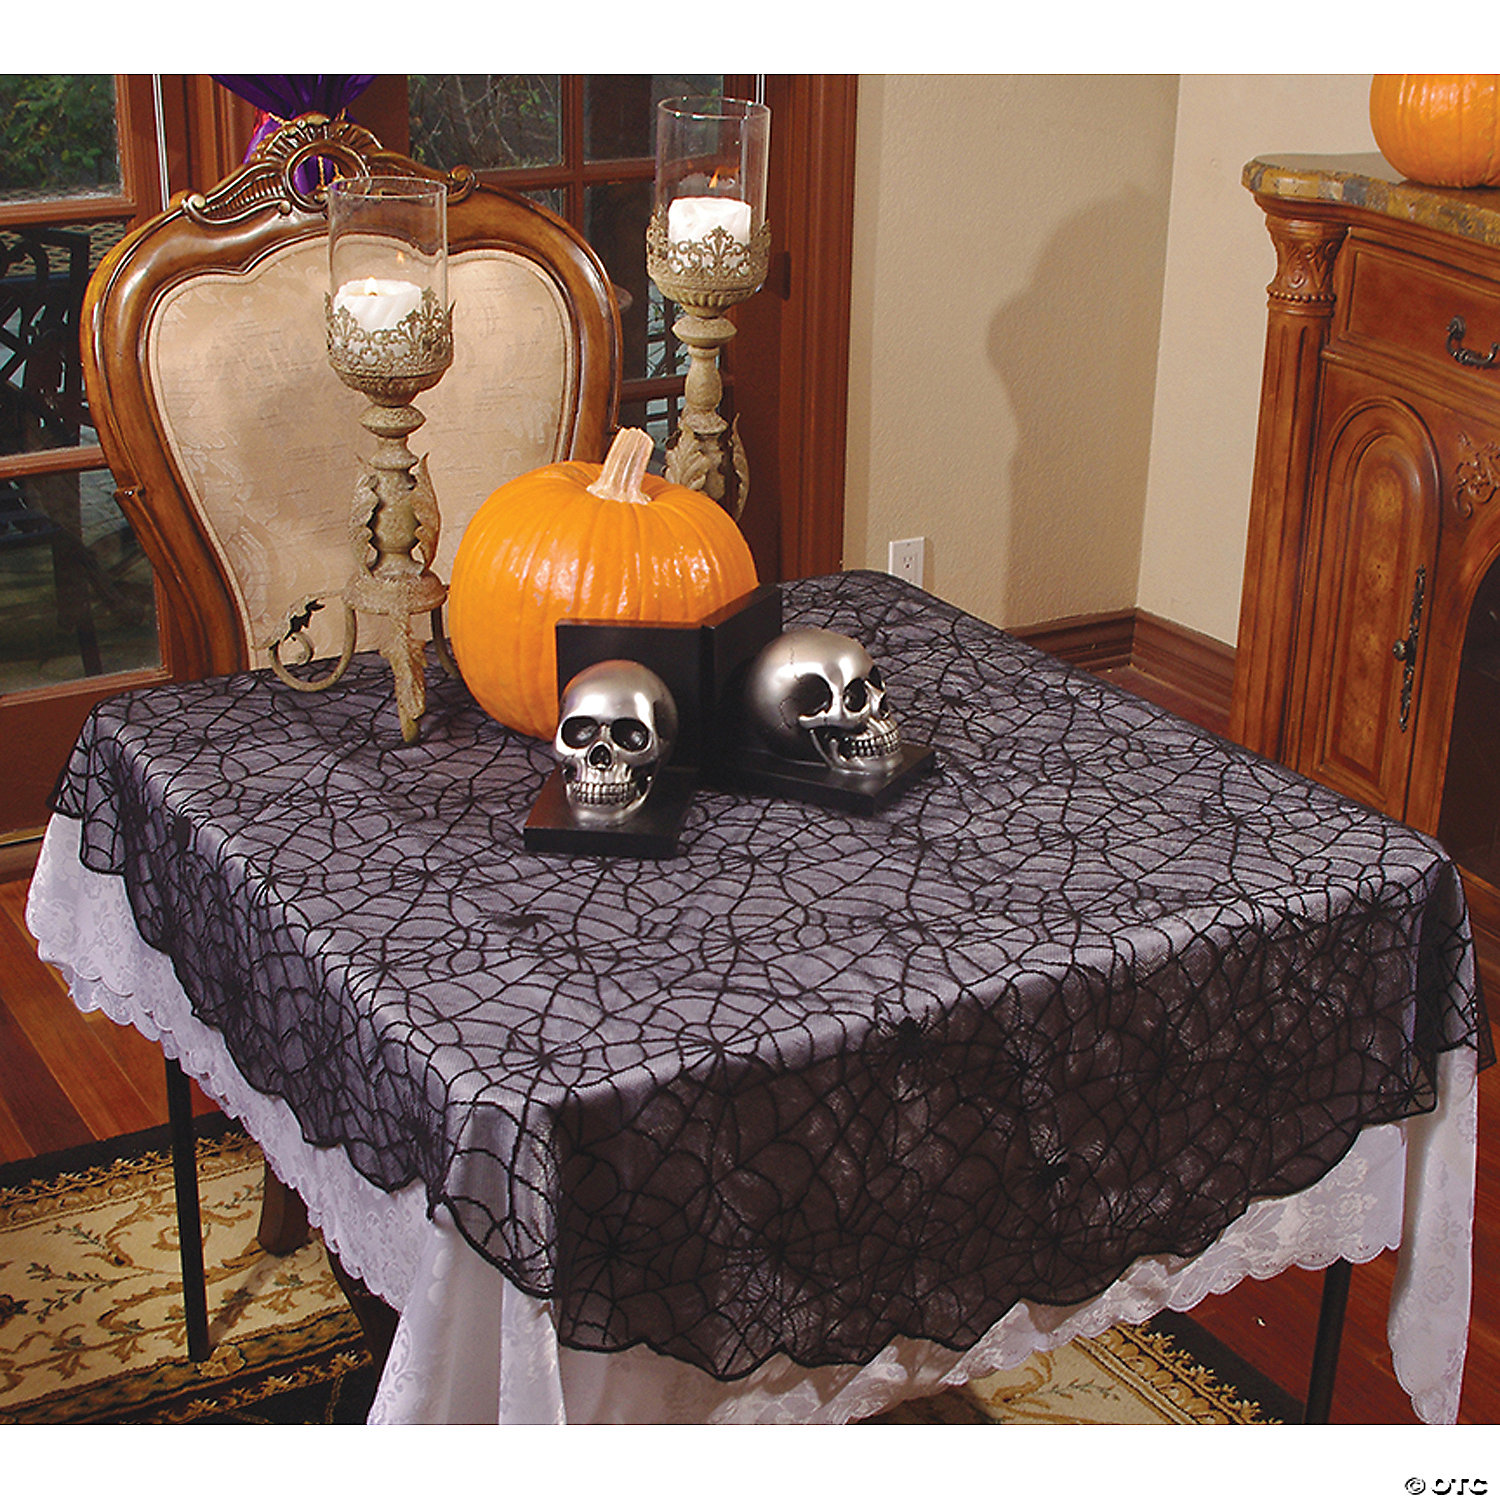 Black Lace Spider Web Skull Tablecloth Halloween Gothic Skeleton Bat Table Cover